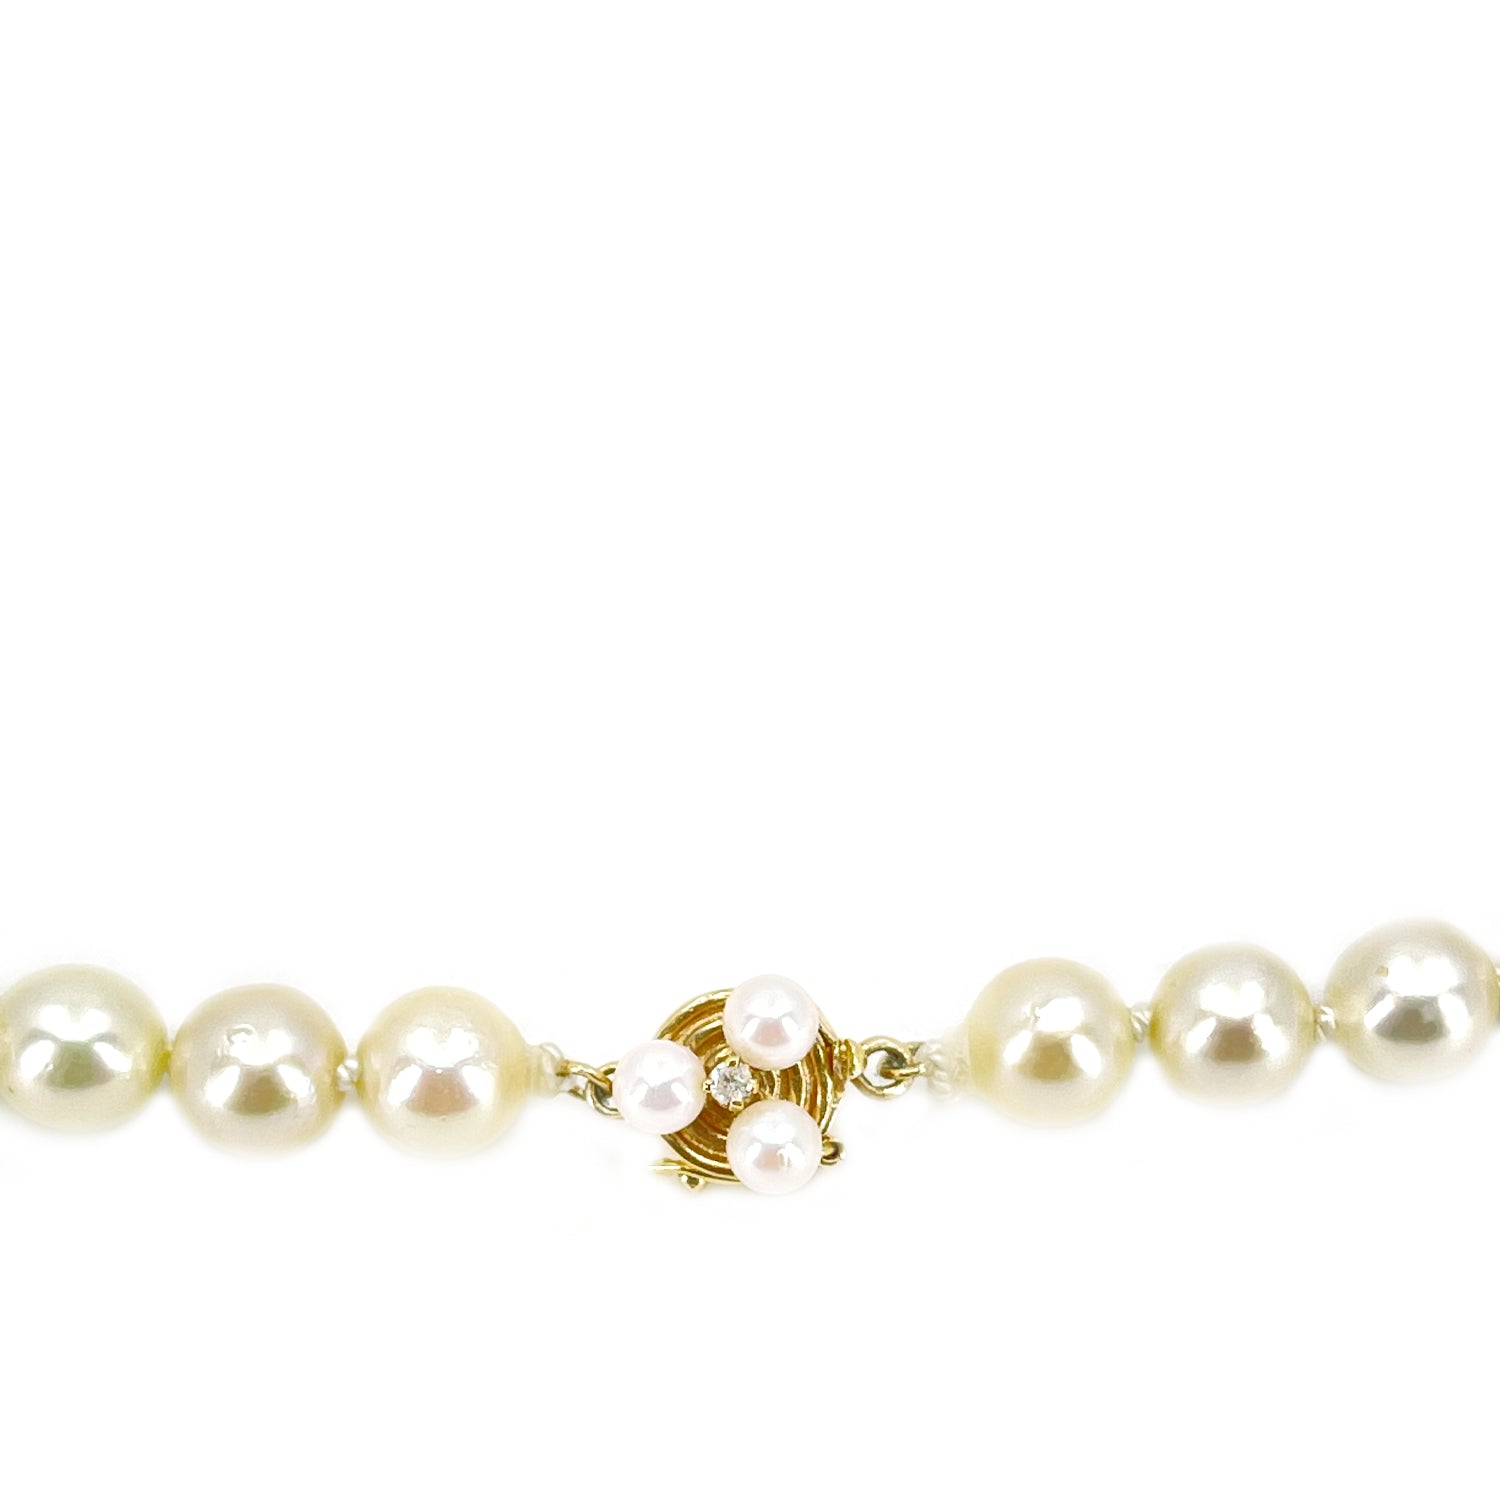 Modernist Japanese Baroque Saltwater Cultured Akoya Pearl Necklace - 14K Yellow Gold Diamond 16.75 Inch